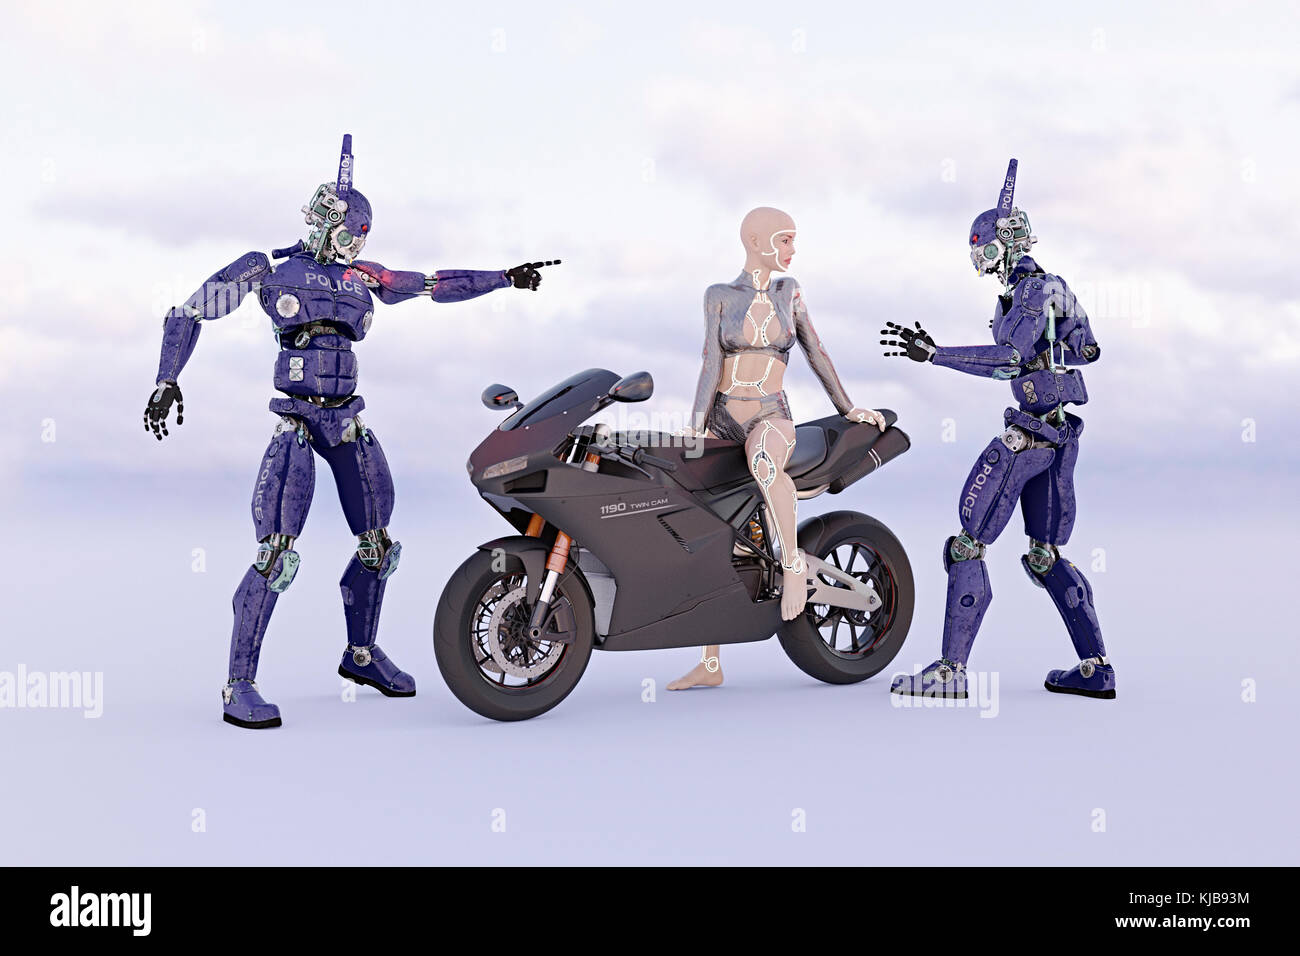 Robot police confronting futuristic woman on motorcycle Stock Photo